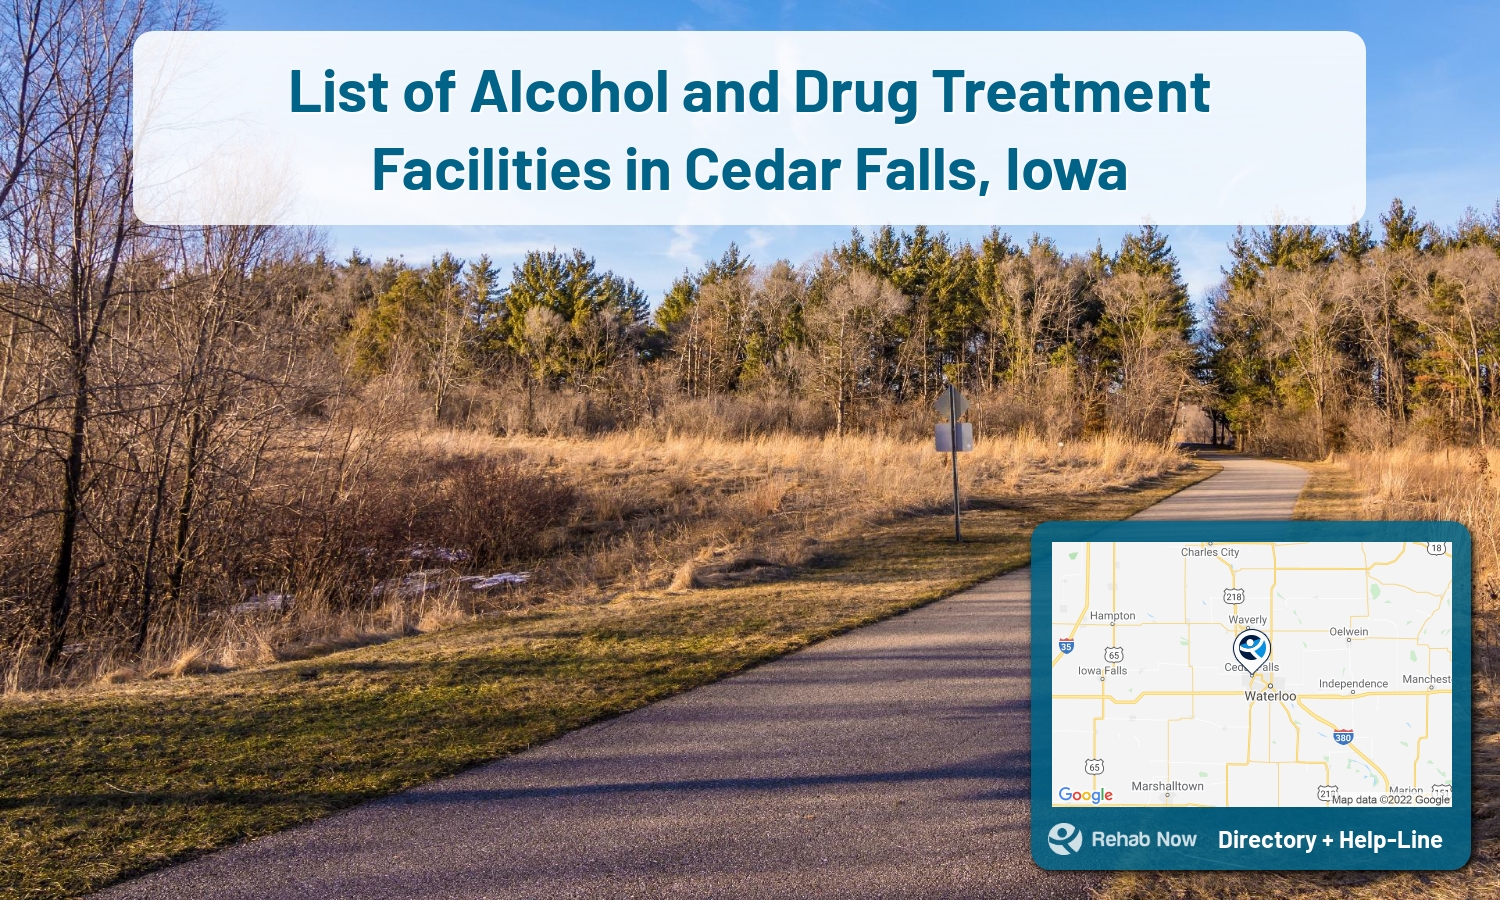 View options, availability, treatment methods, and more, for drug rehab and alcohol treatment in Cedar Falls, Iowa